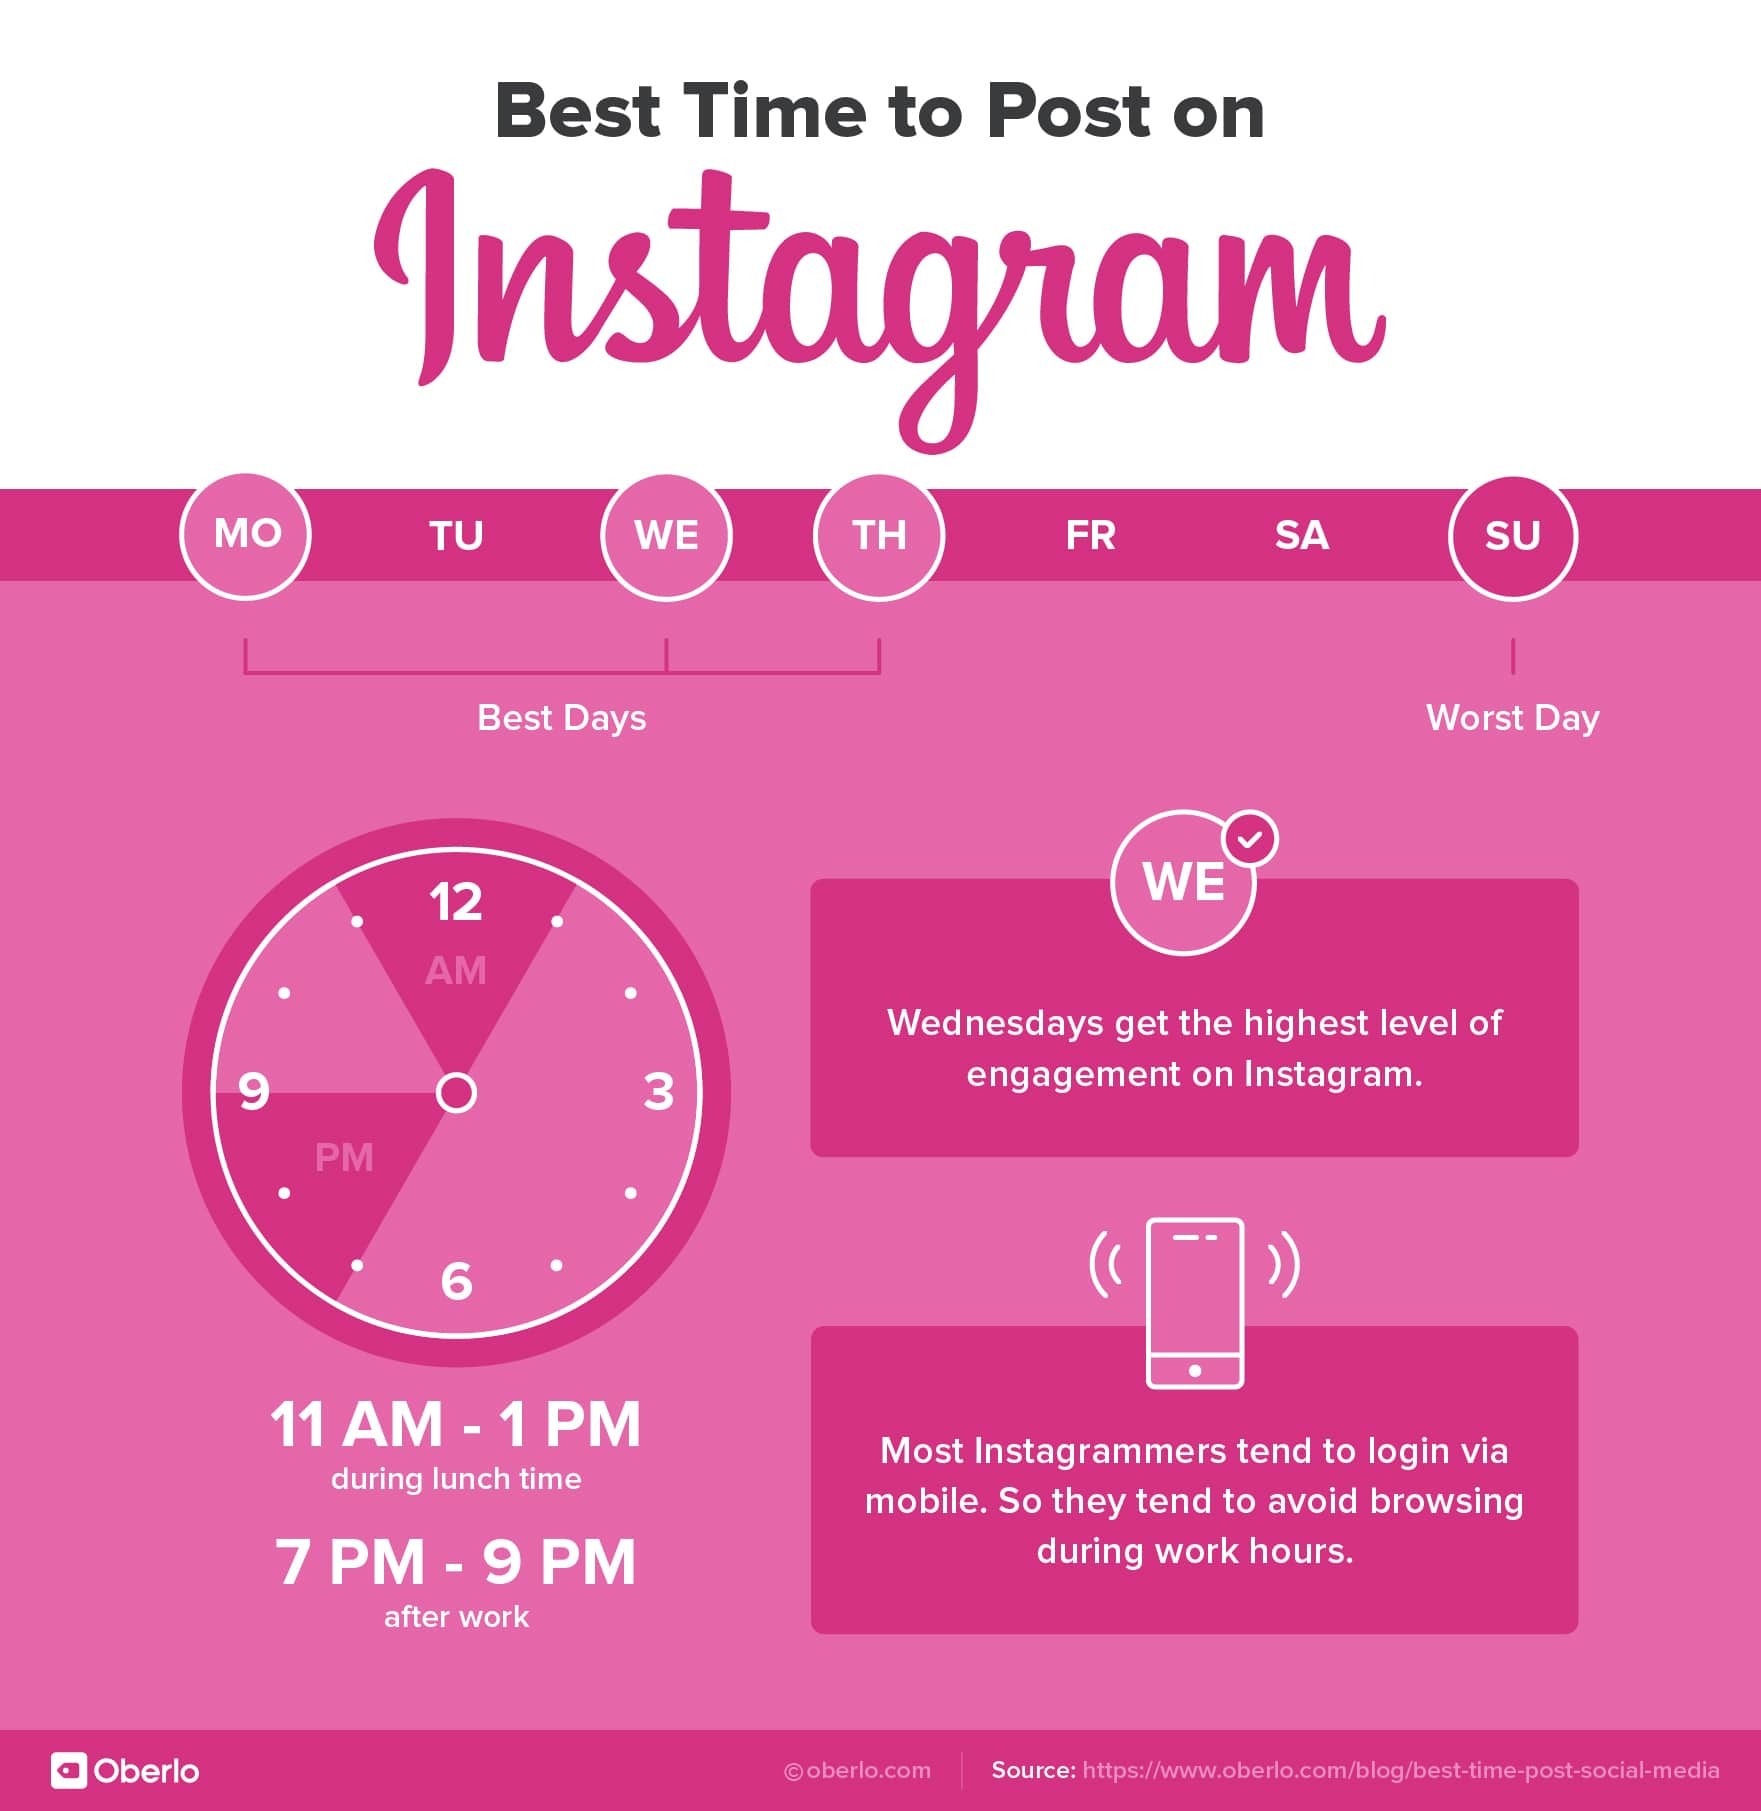 The best times to post on Instagram 2019